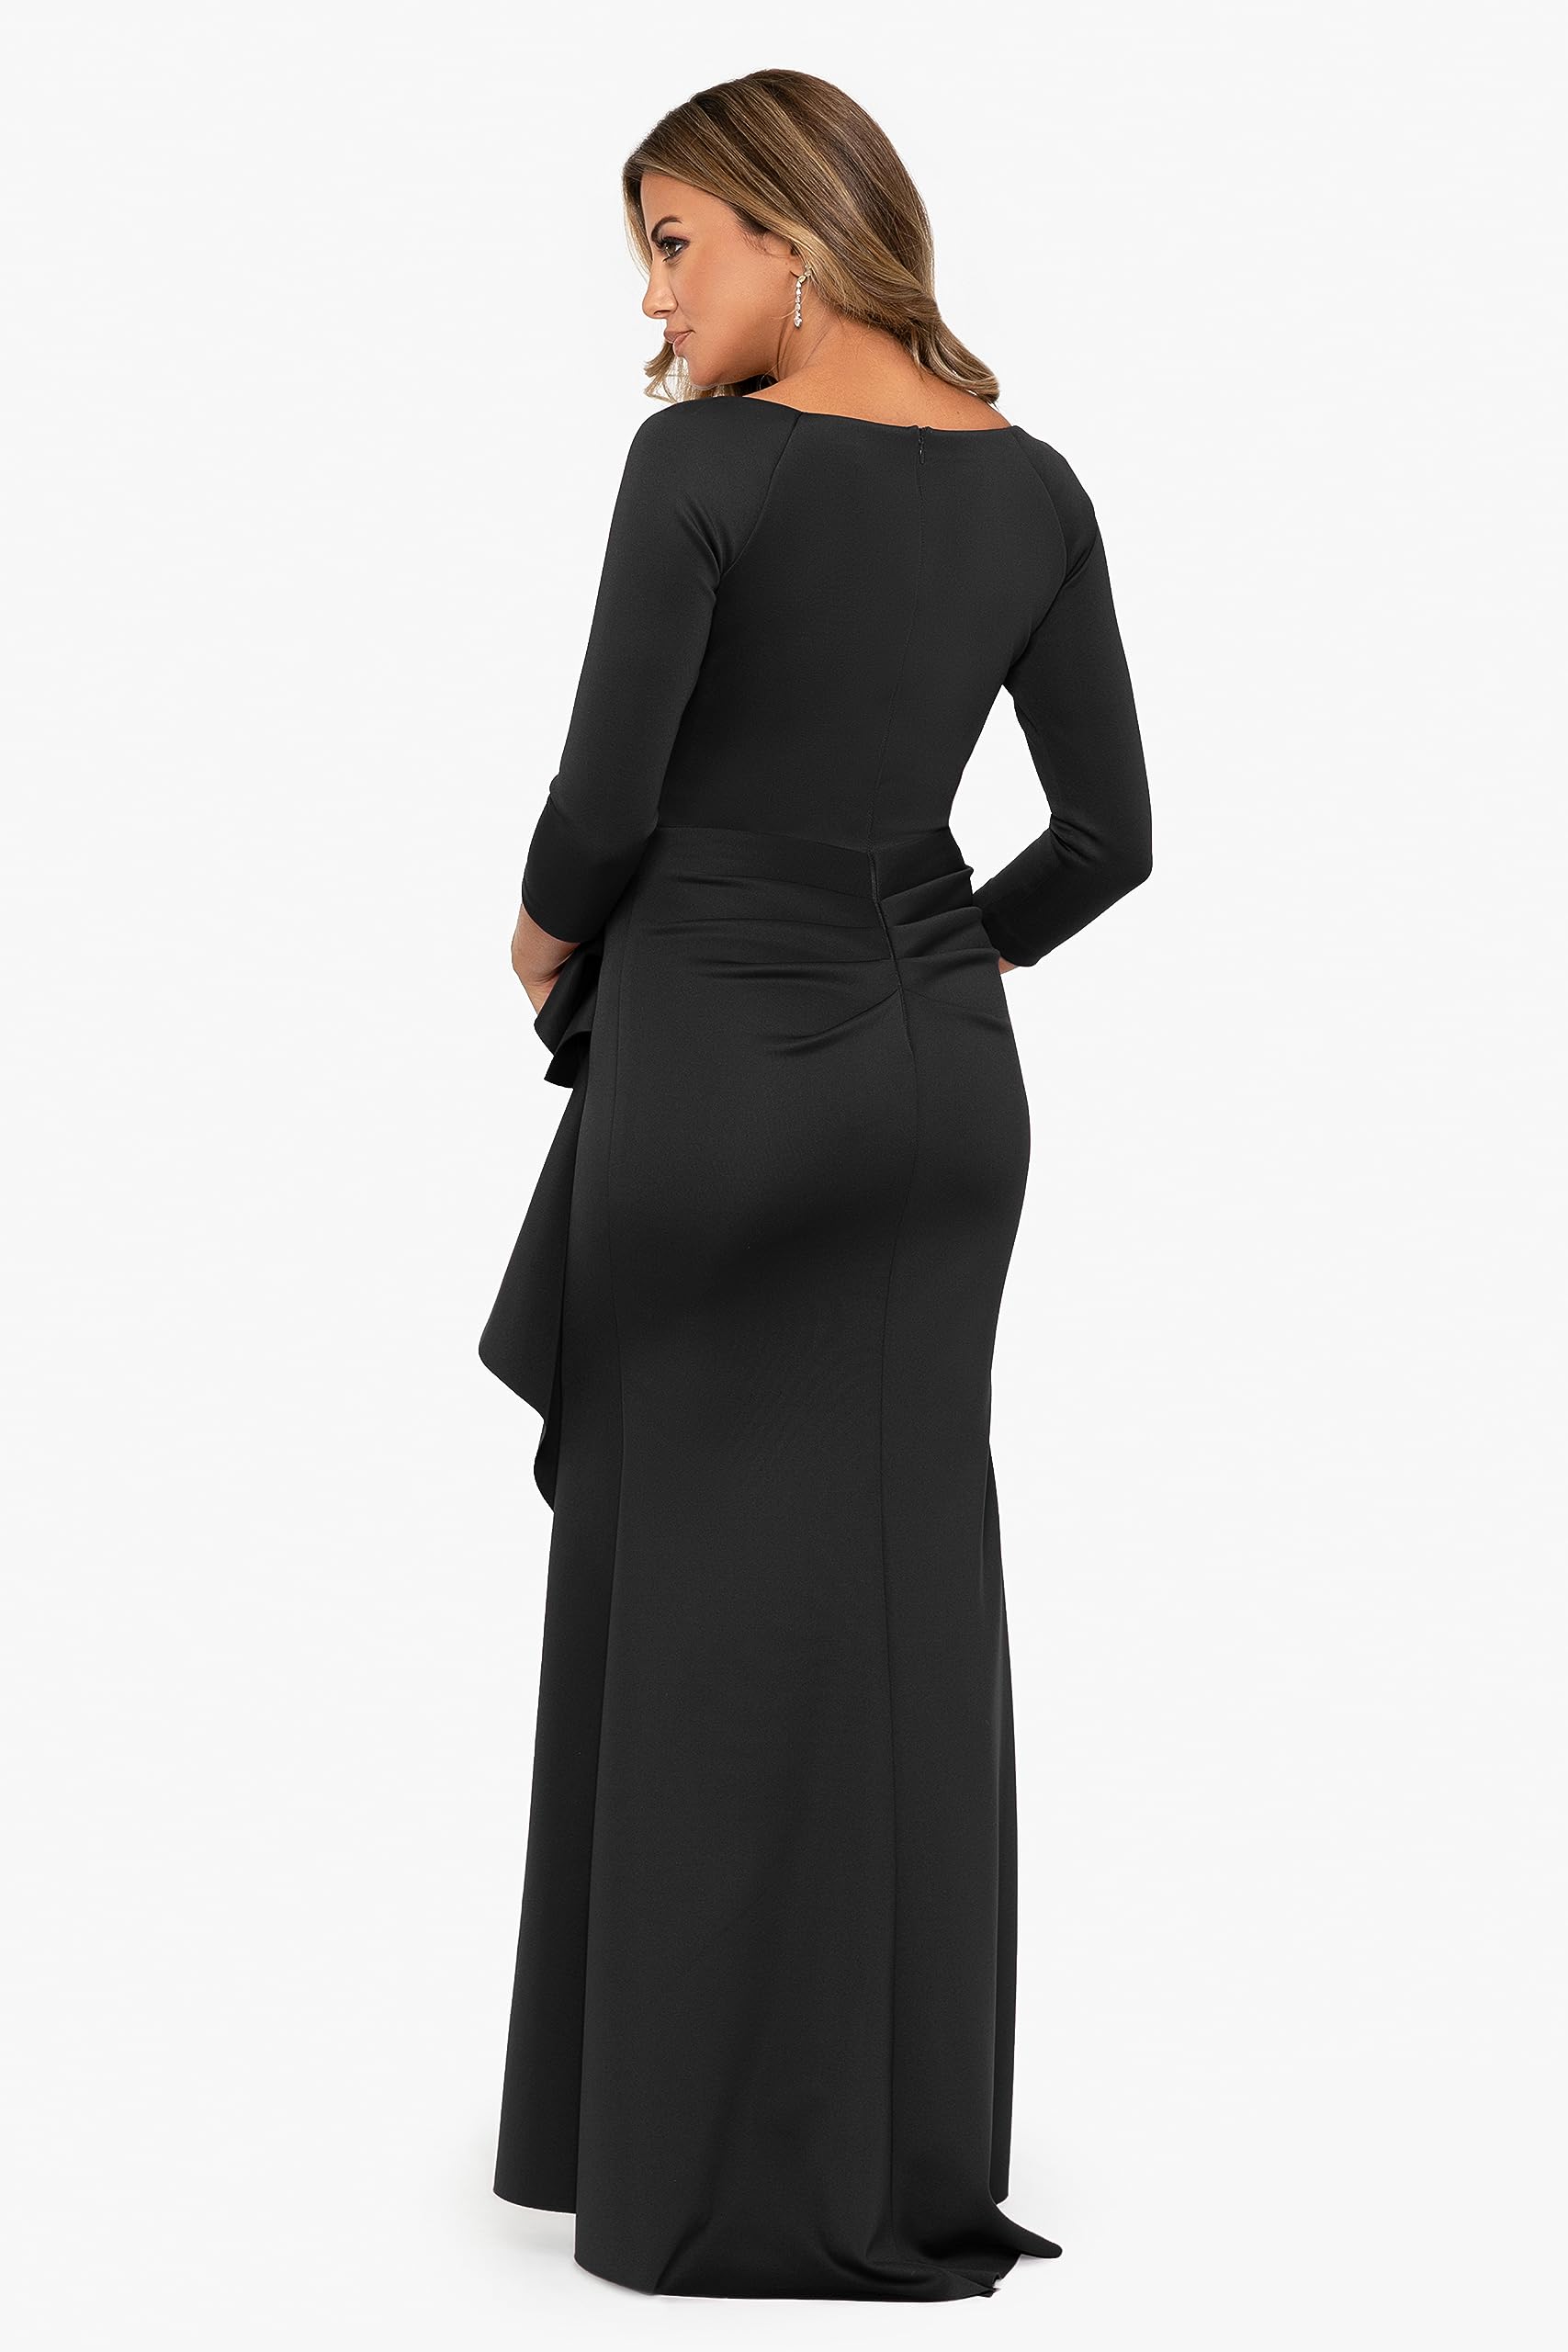 Xscape Women's Long 3/4 Sleeve V-Neck Side Ruched Gown (Reg and Petite)